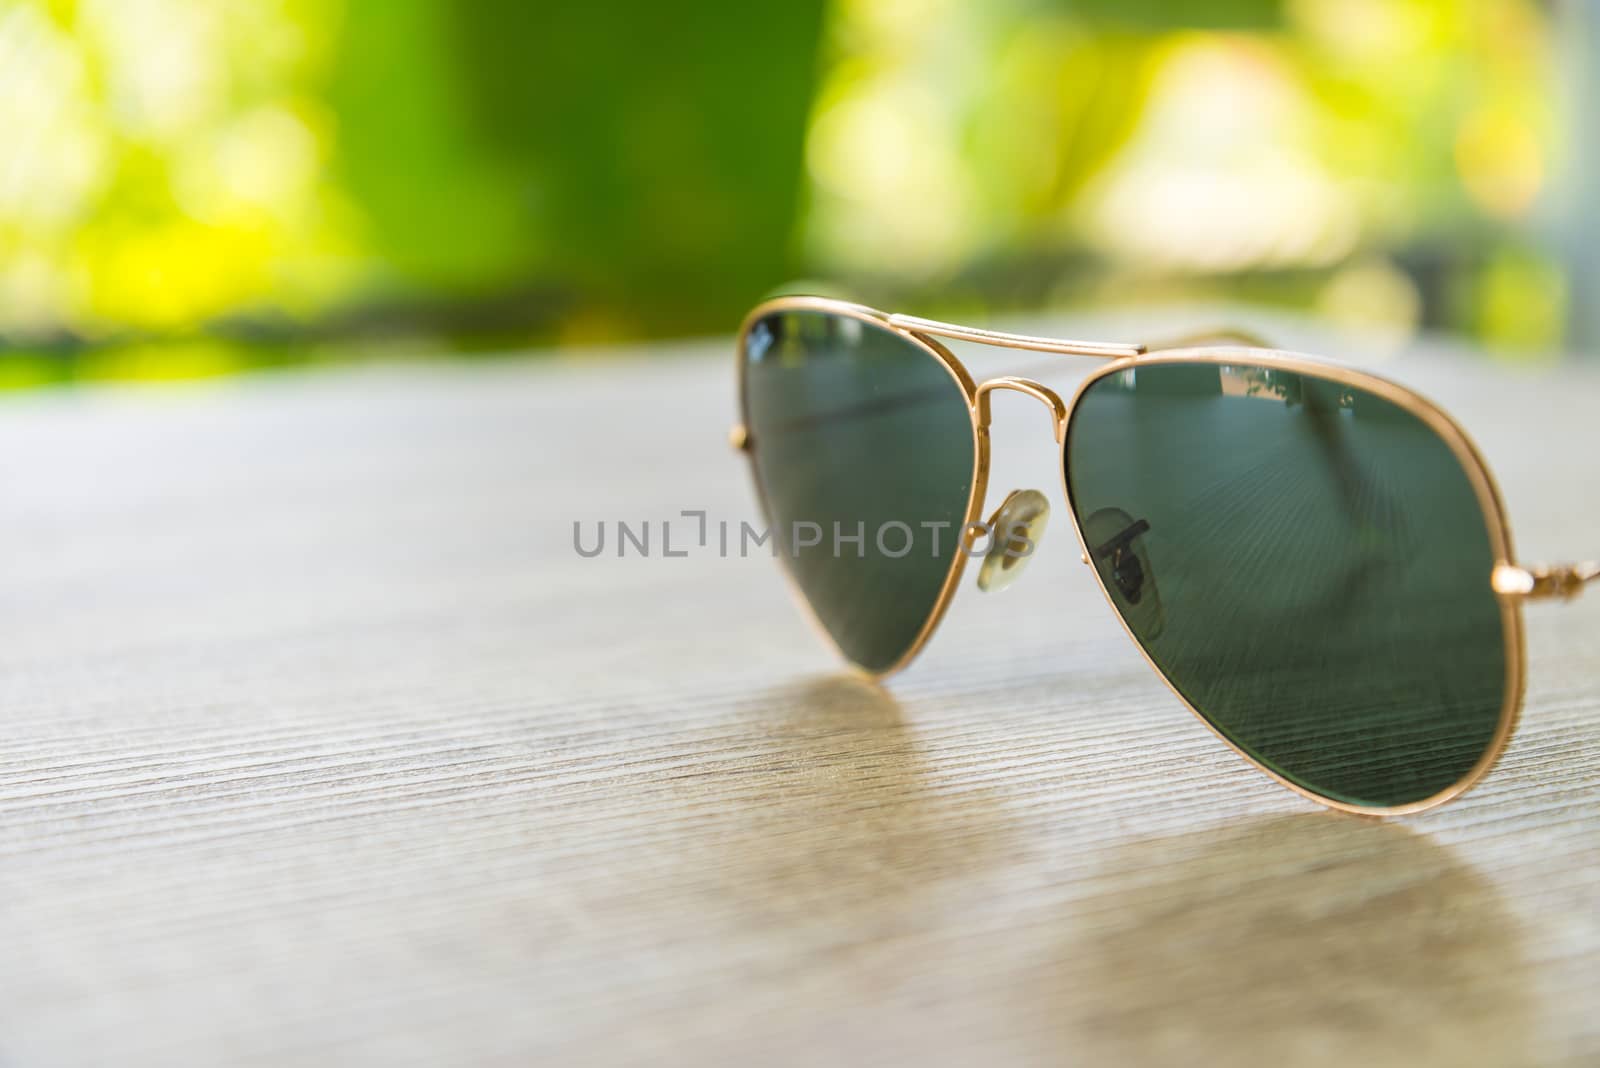 Sunglasses resting on a wooden table.